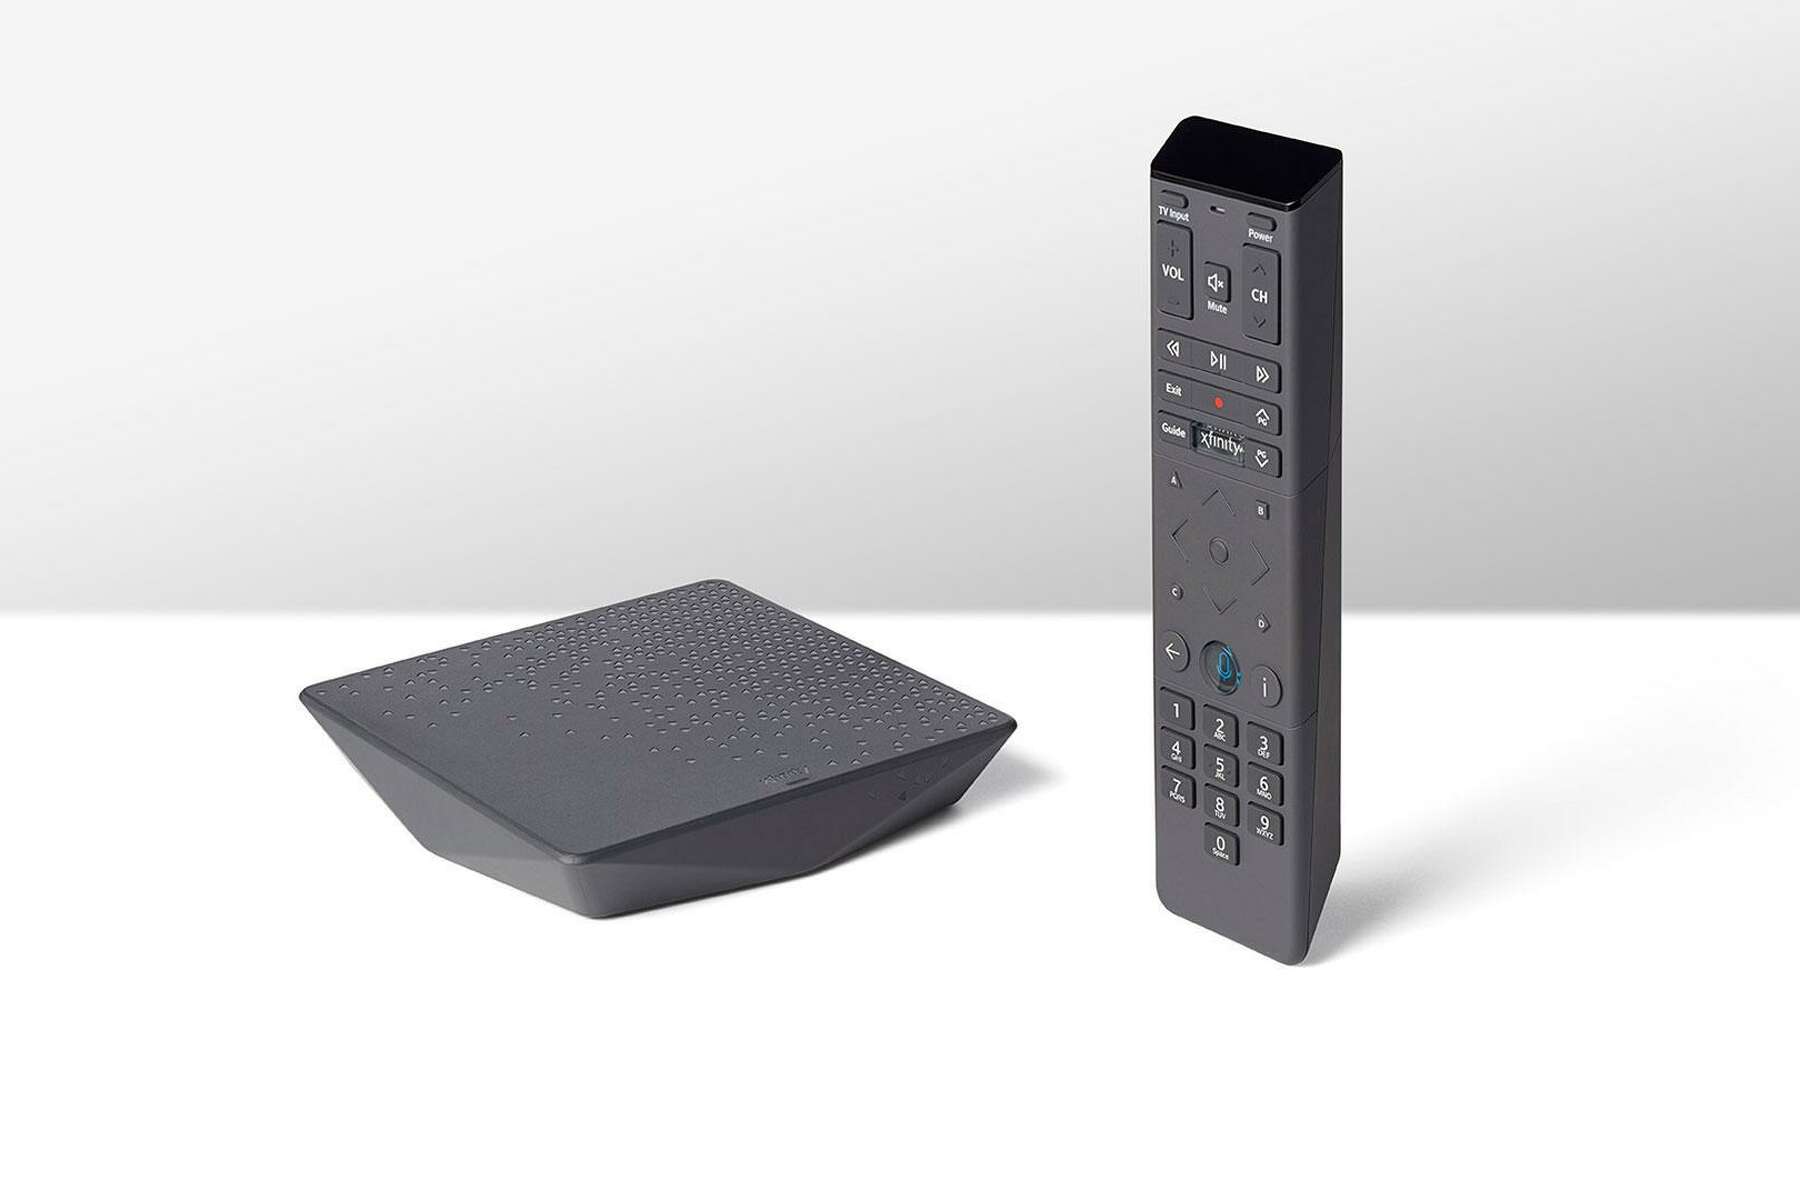 Comcast's Flex streaming box is free, but it may not be for you